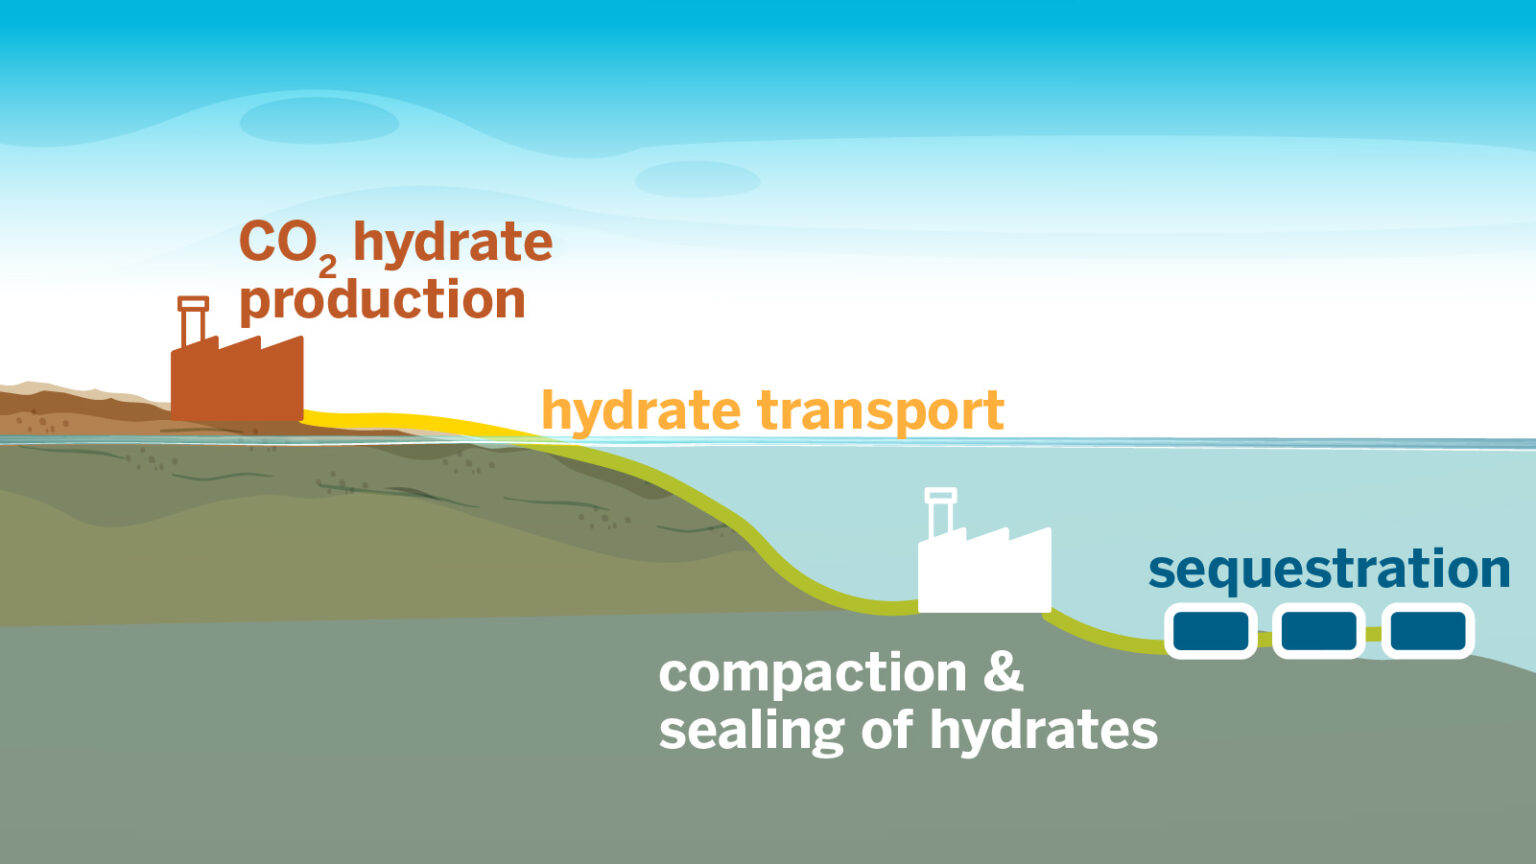 Image of CO2 hydrate productio above water level, hydrate transport at water level and compaction & sealing of hydrates and sequestration on below water